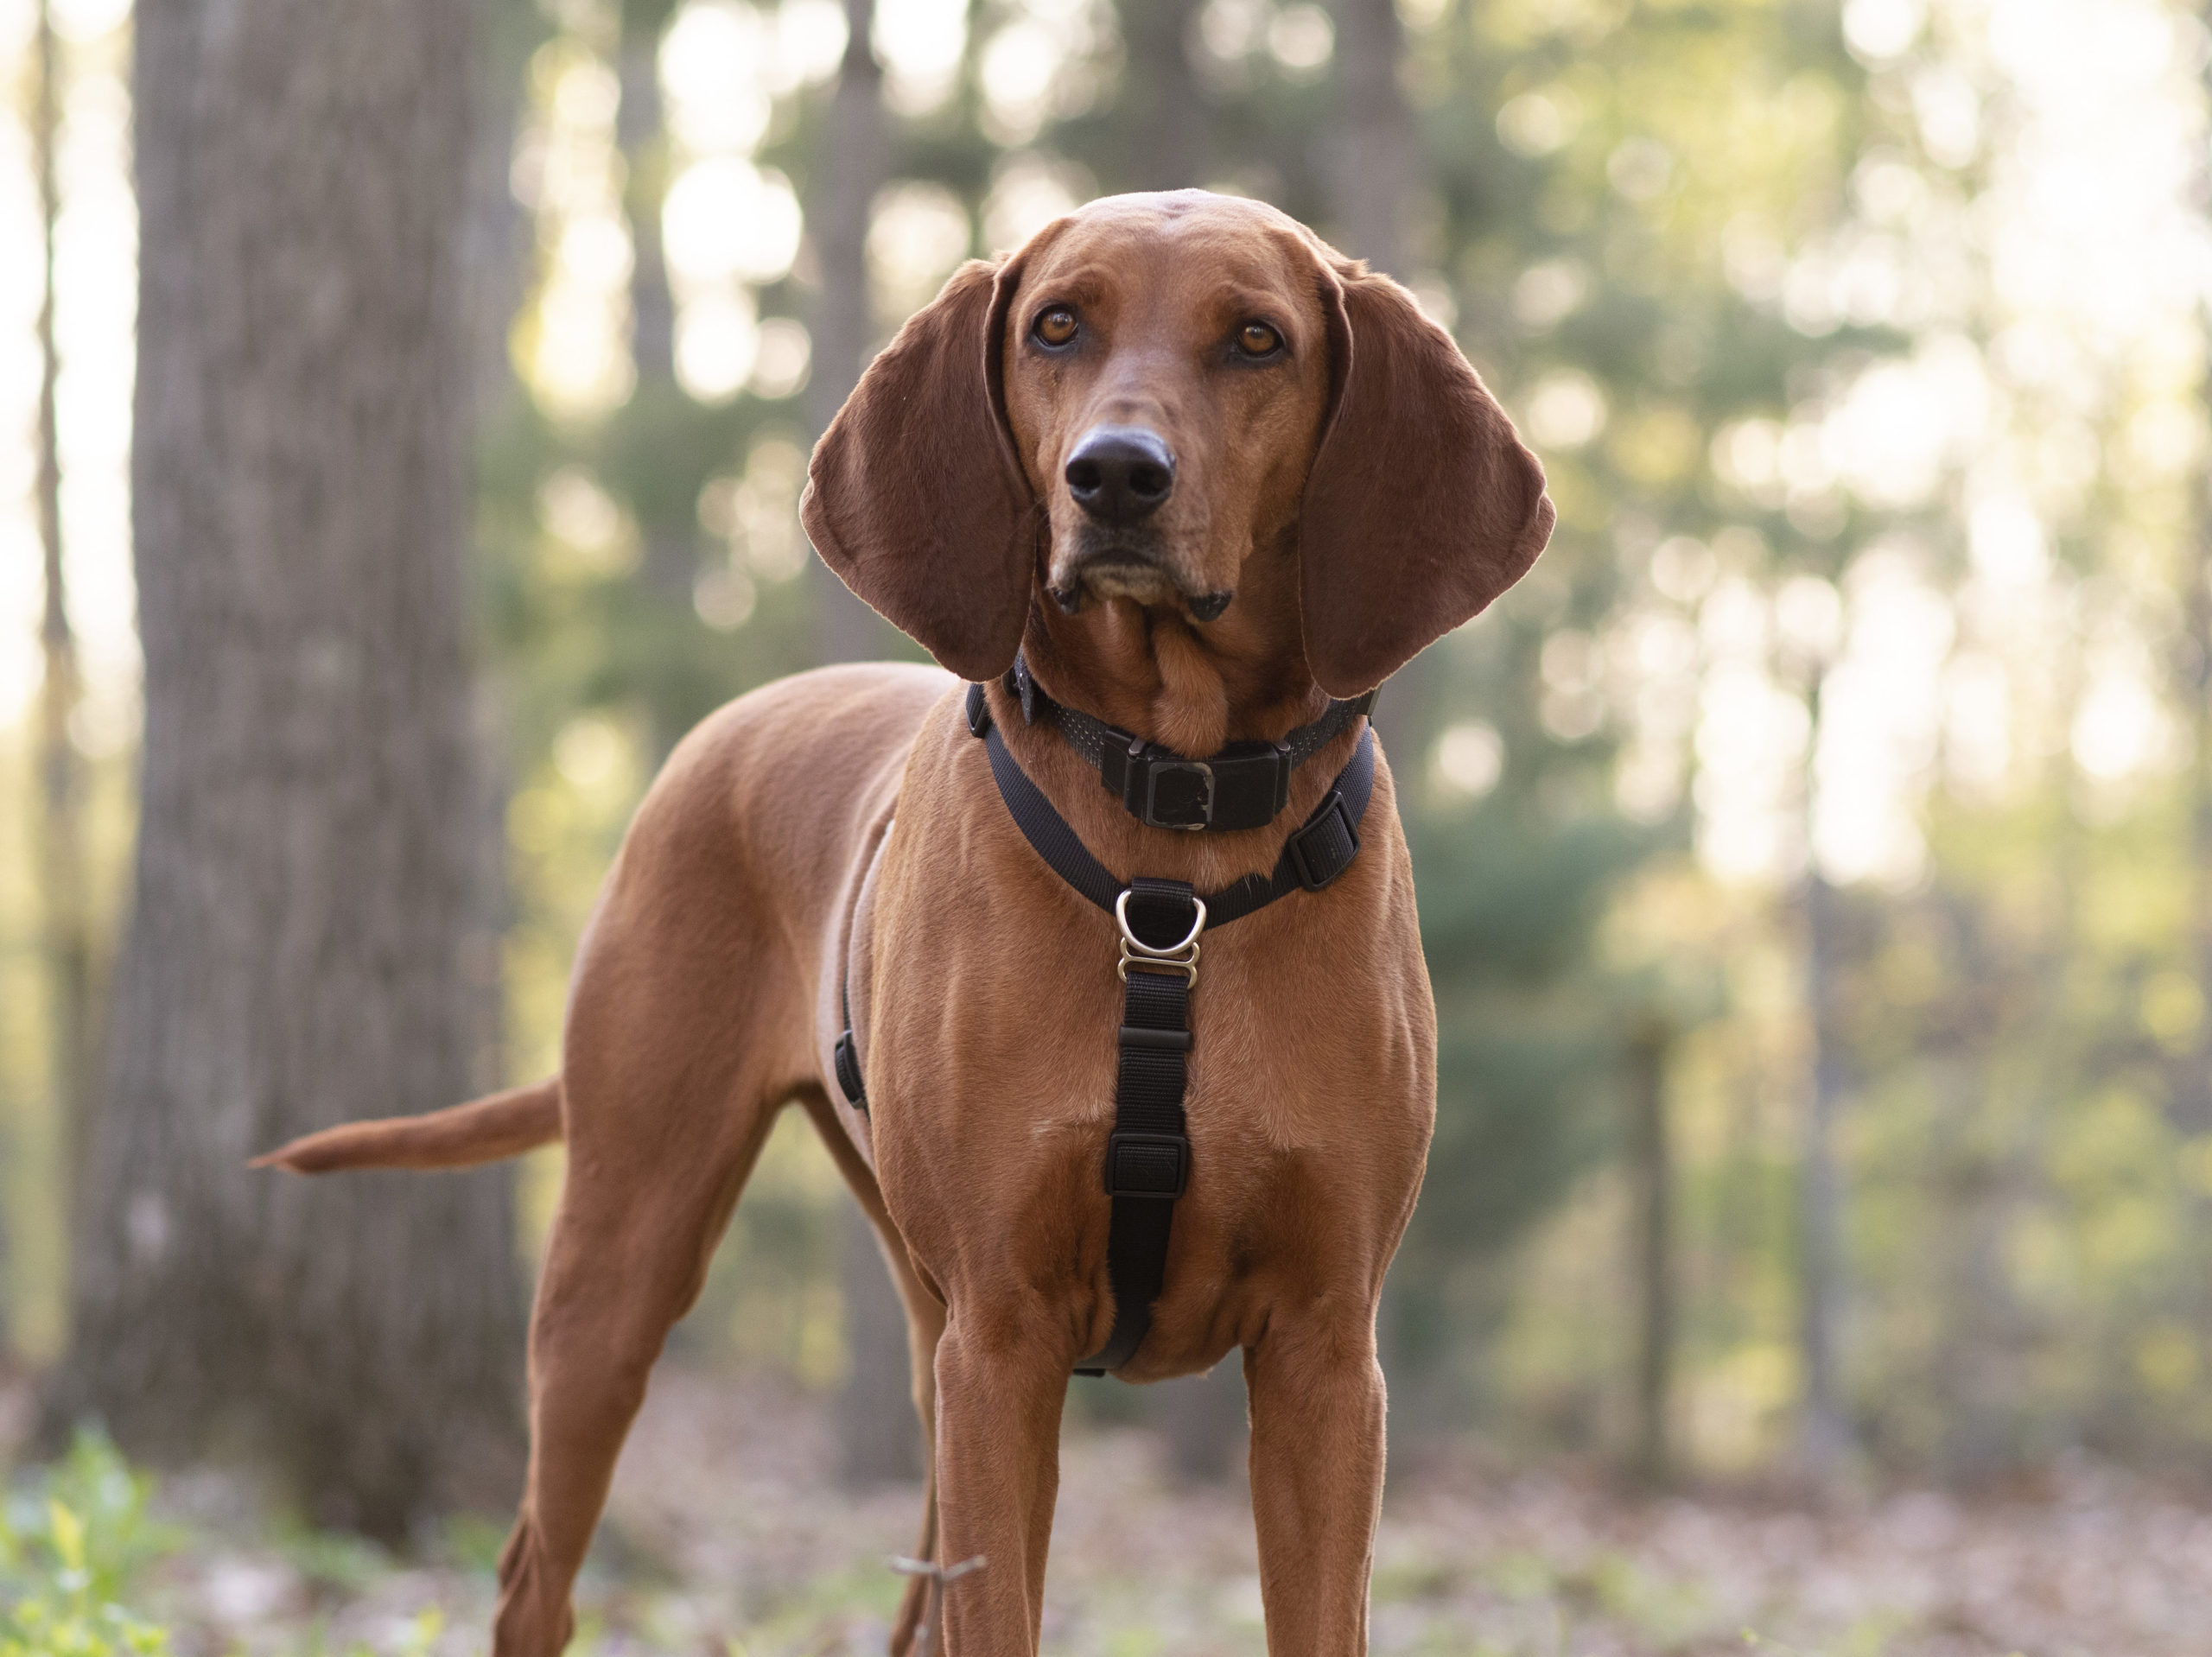 the blue-9 balance harness on shelby the redbone coonhound y-shaped harness on hound dog